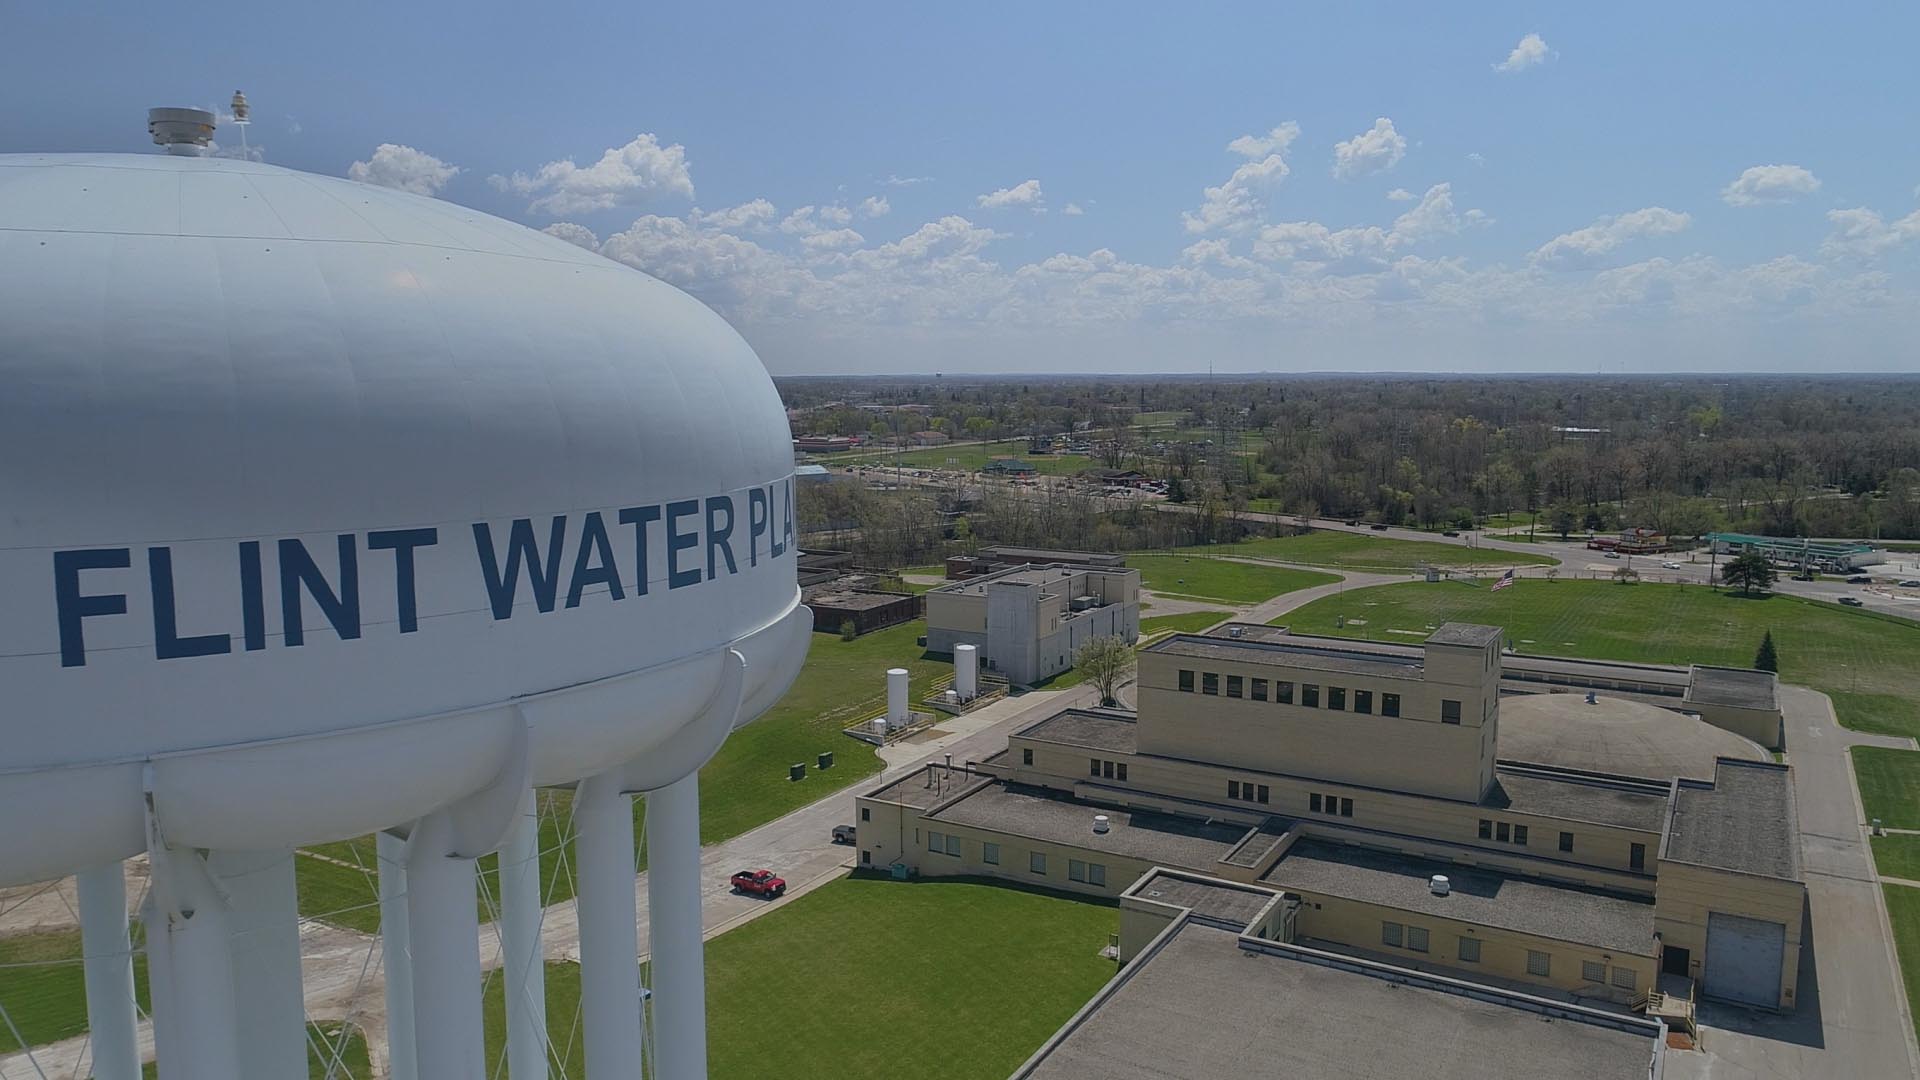 A water tower labeled "FLINT WATER PLANT".